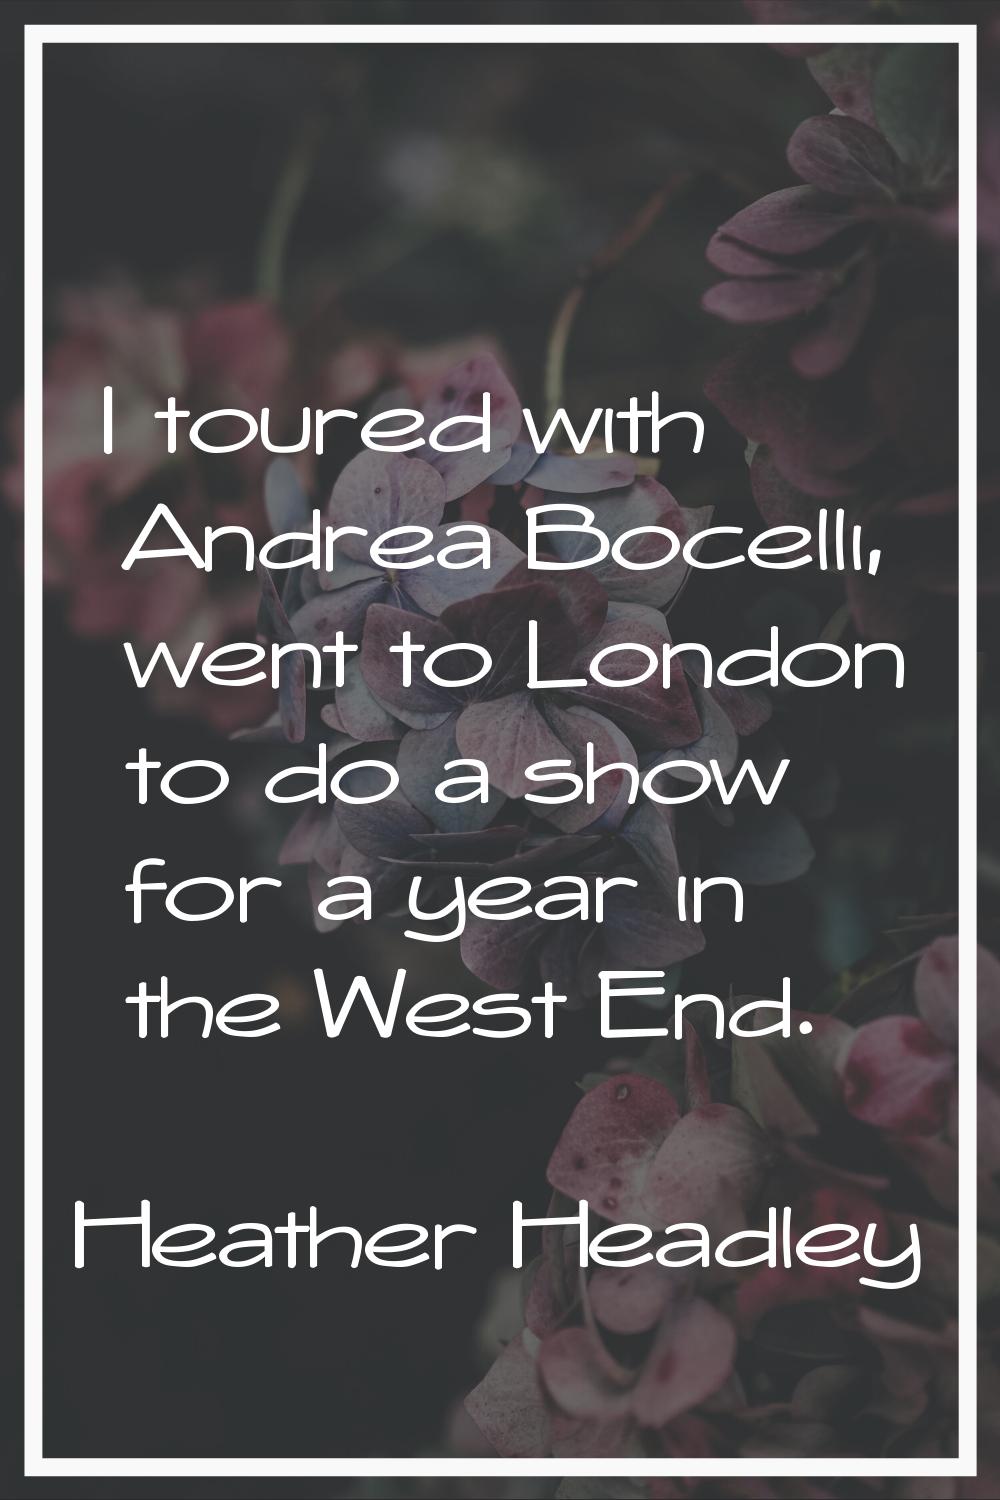 I toured with Andrea Bocelli, went to London to do a show for a year in the West End.